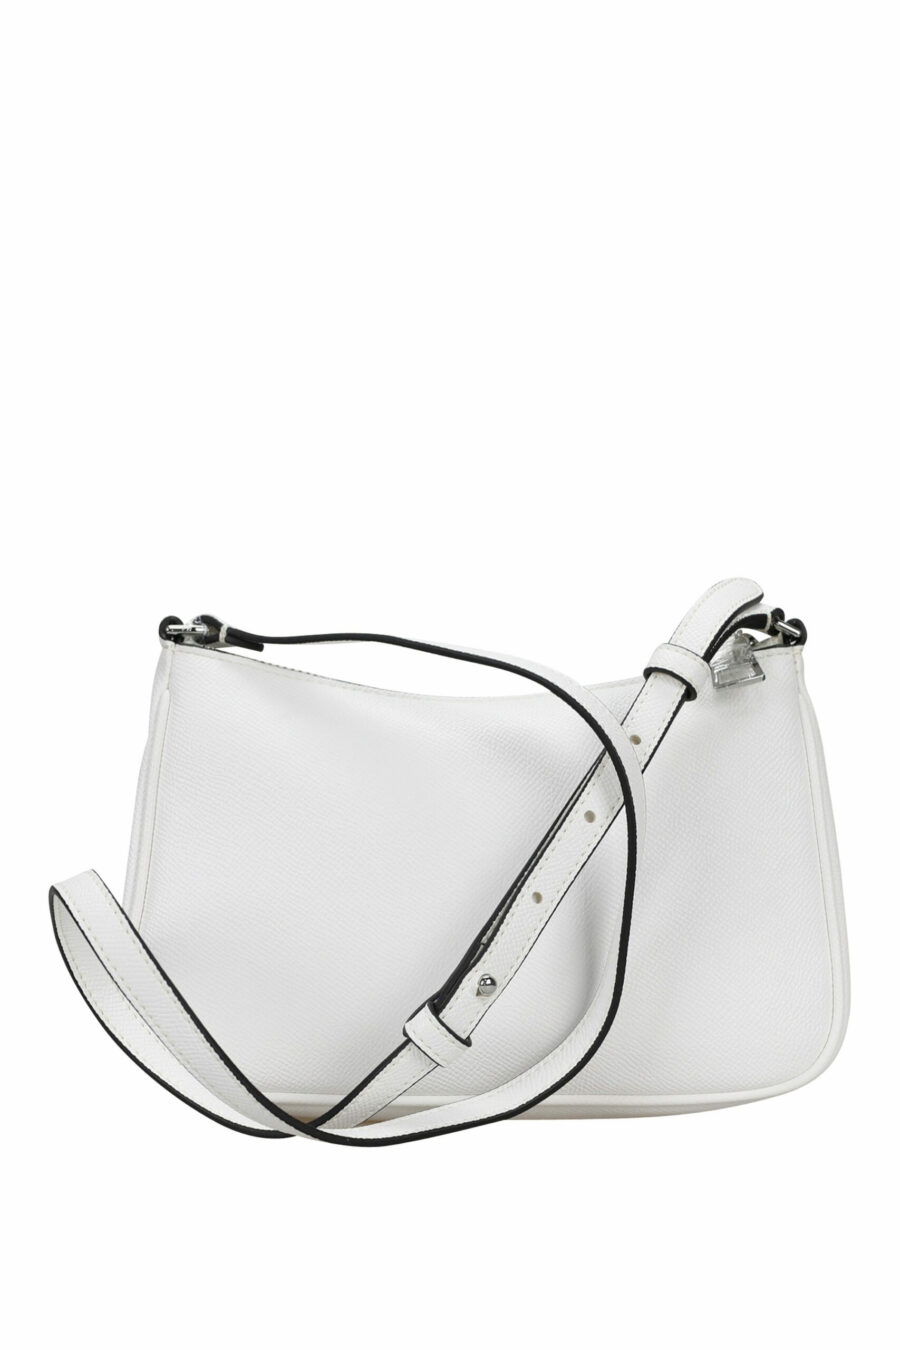 White shoulder bag with mini-logo "rue st guillaume" - 8720744417071 2 scaled